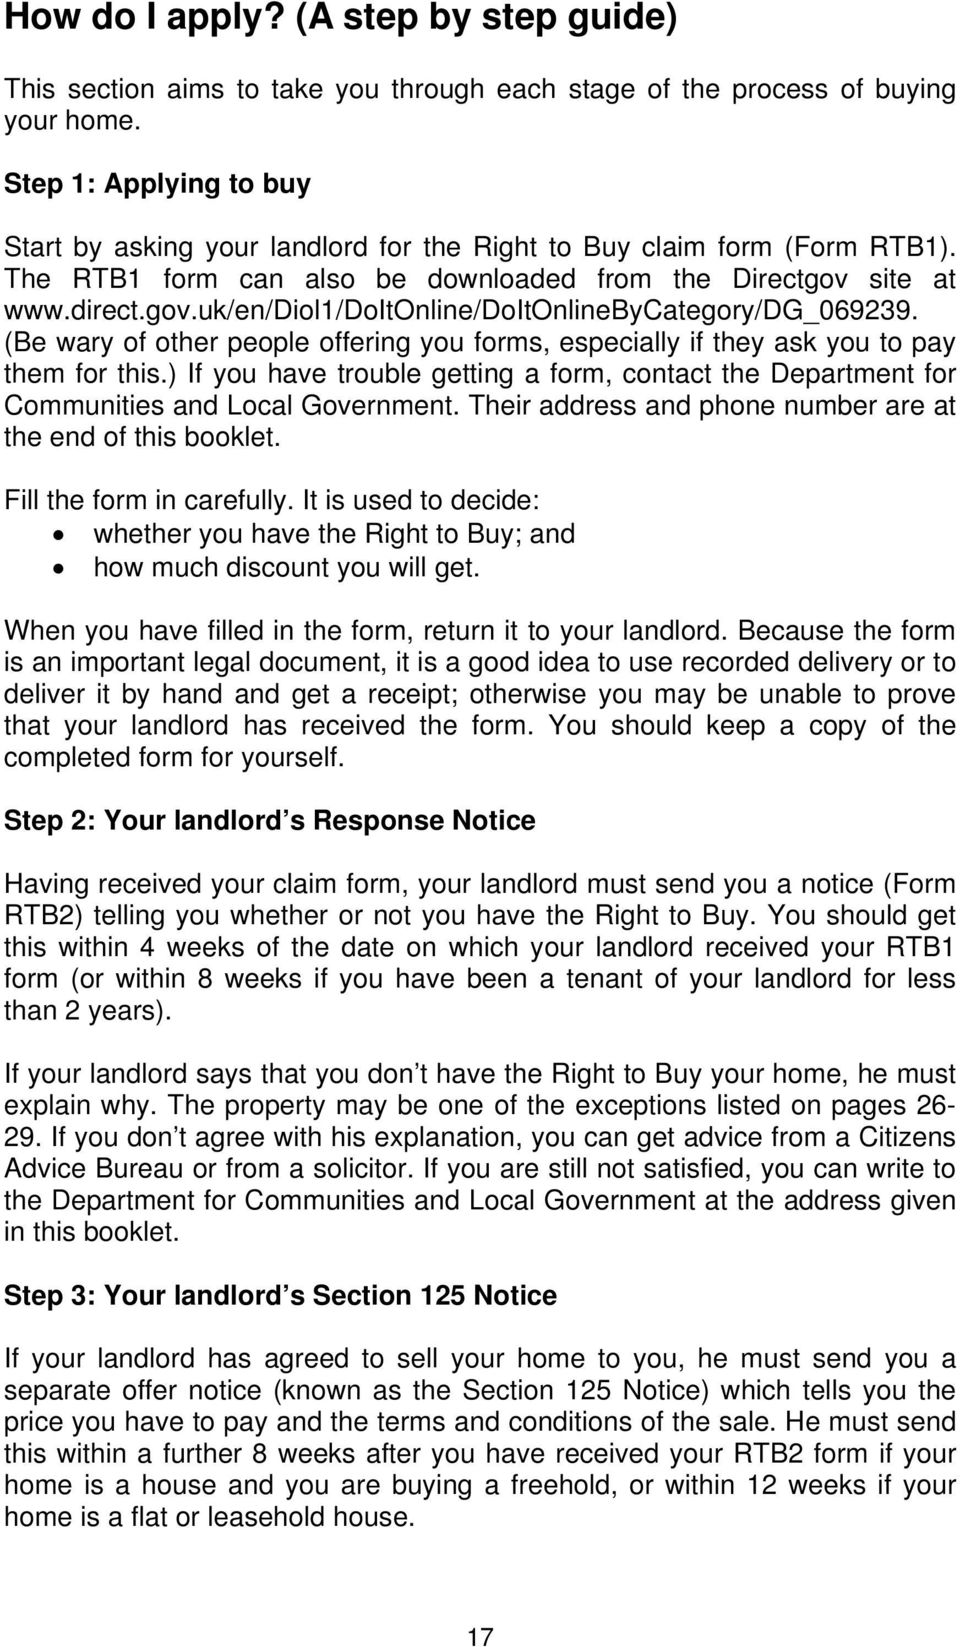 site at www.direct.gov.uk/en/diol1/doitonline/doitonlinebycategory/dg_069239. (Be wary of other people offering you forms, especially if they ask you to pay them for this.